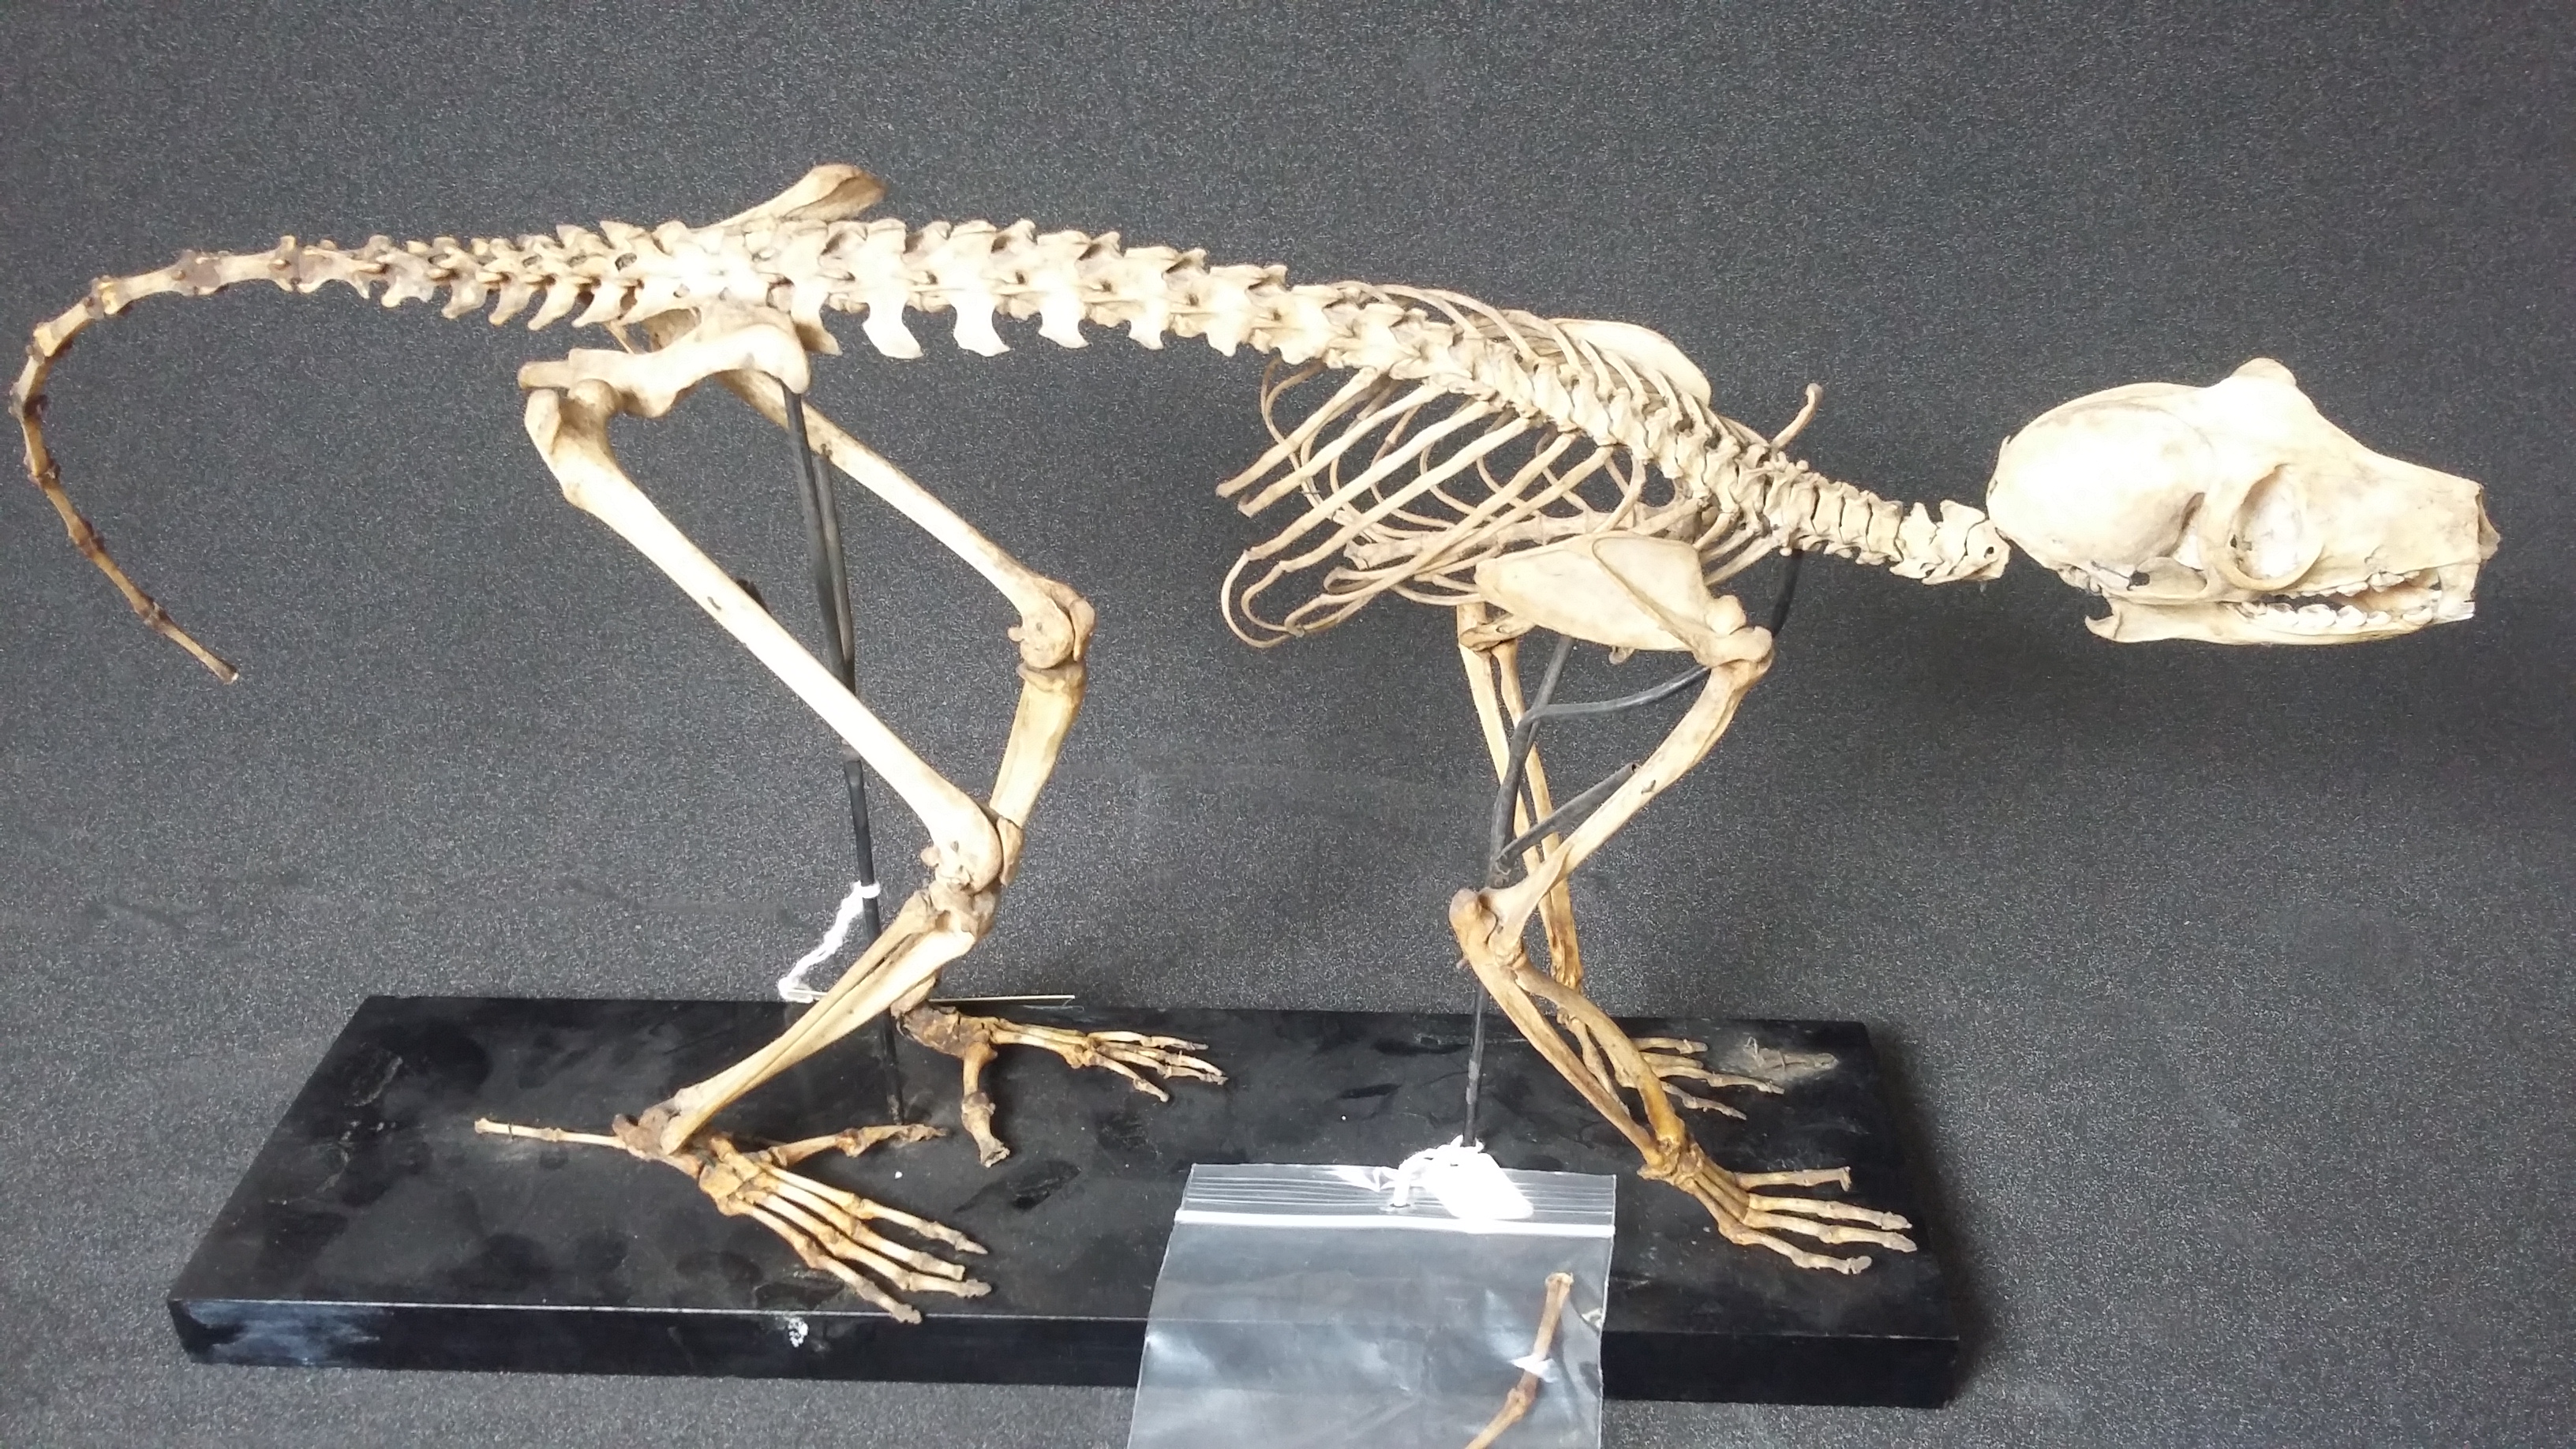 The fully articulated skeleton of the black lemur, Eulemur macaco, found in the store.